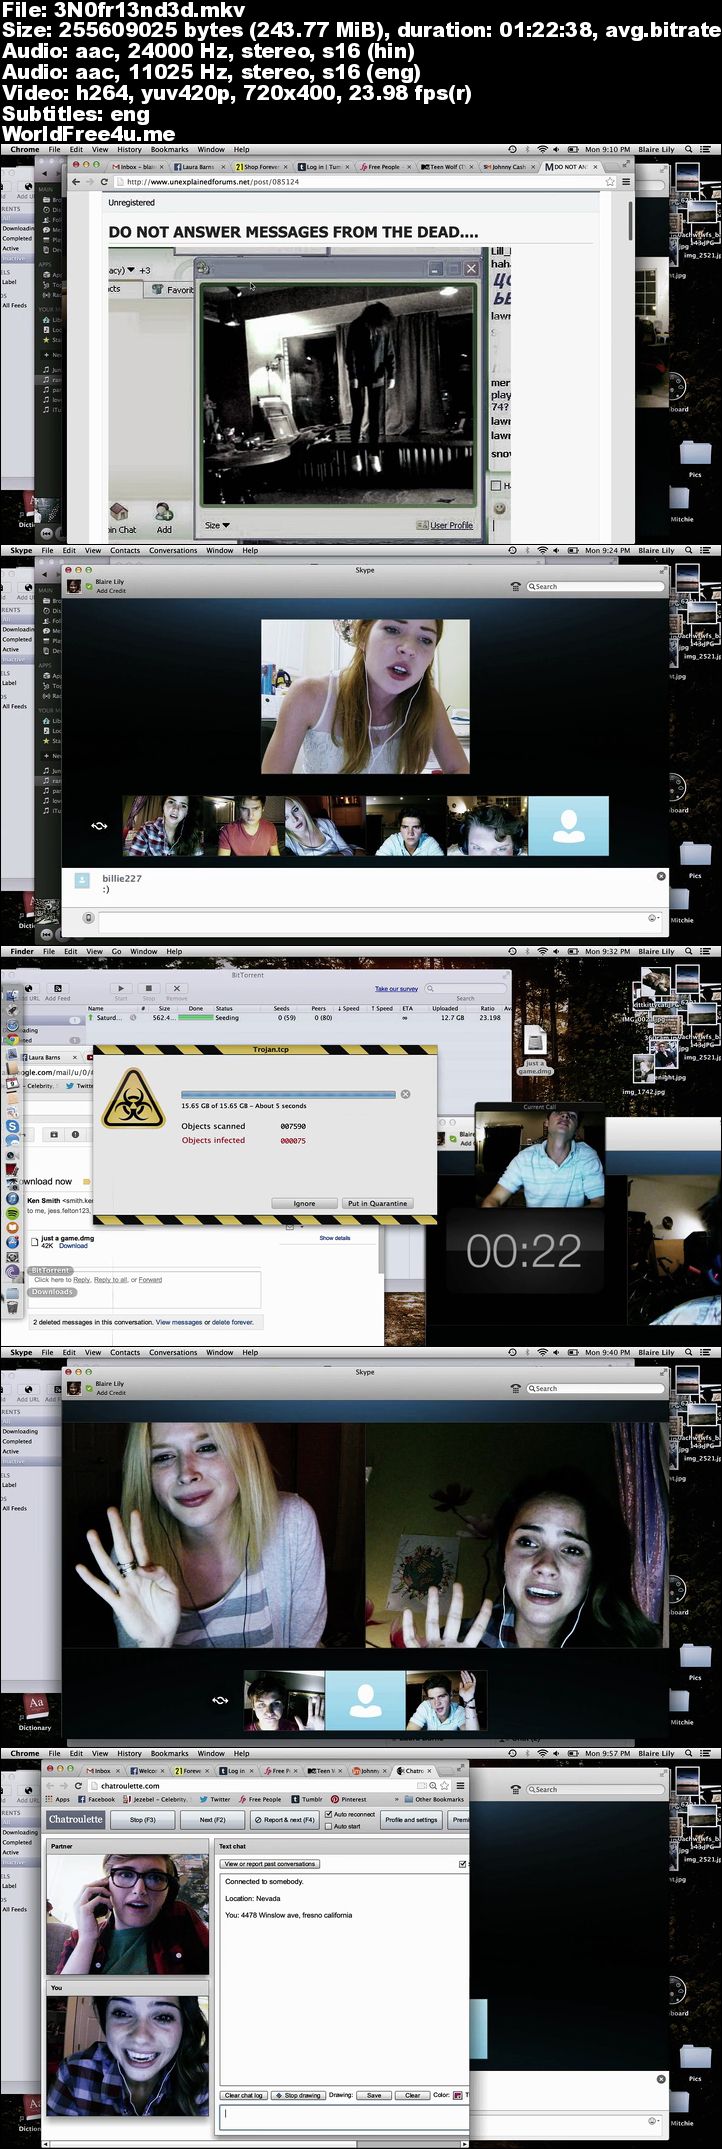 Unfriended full movie no sign up or download